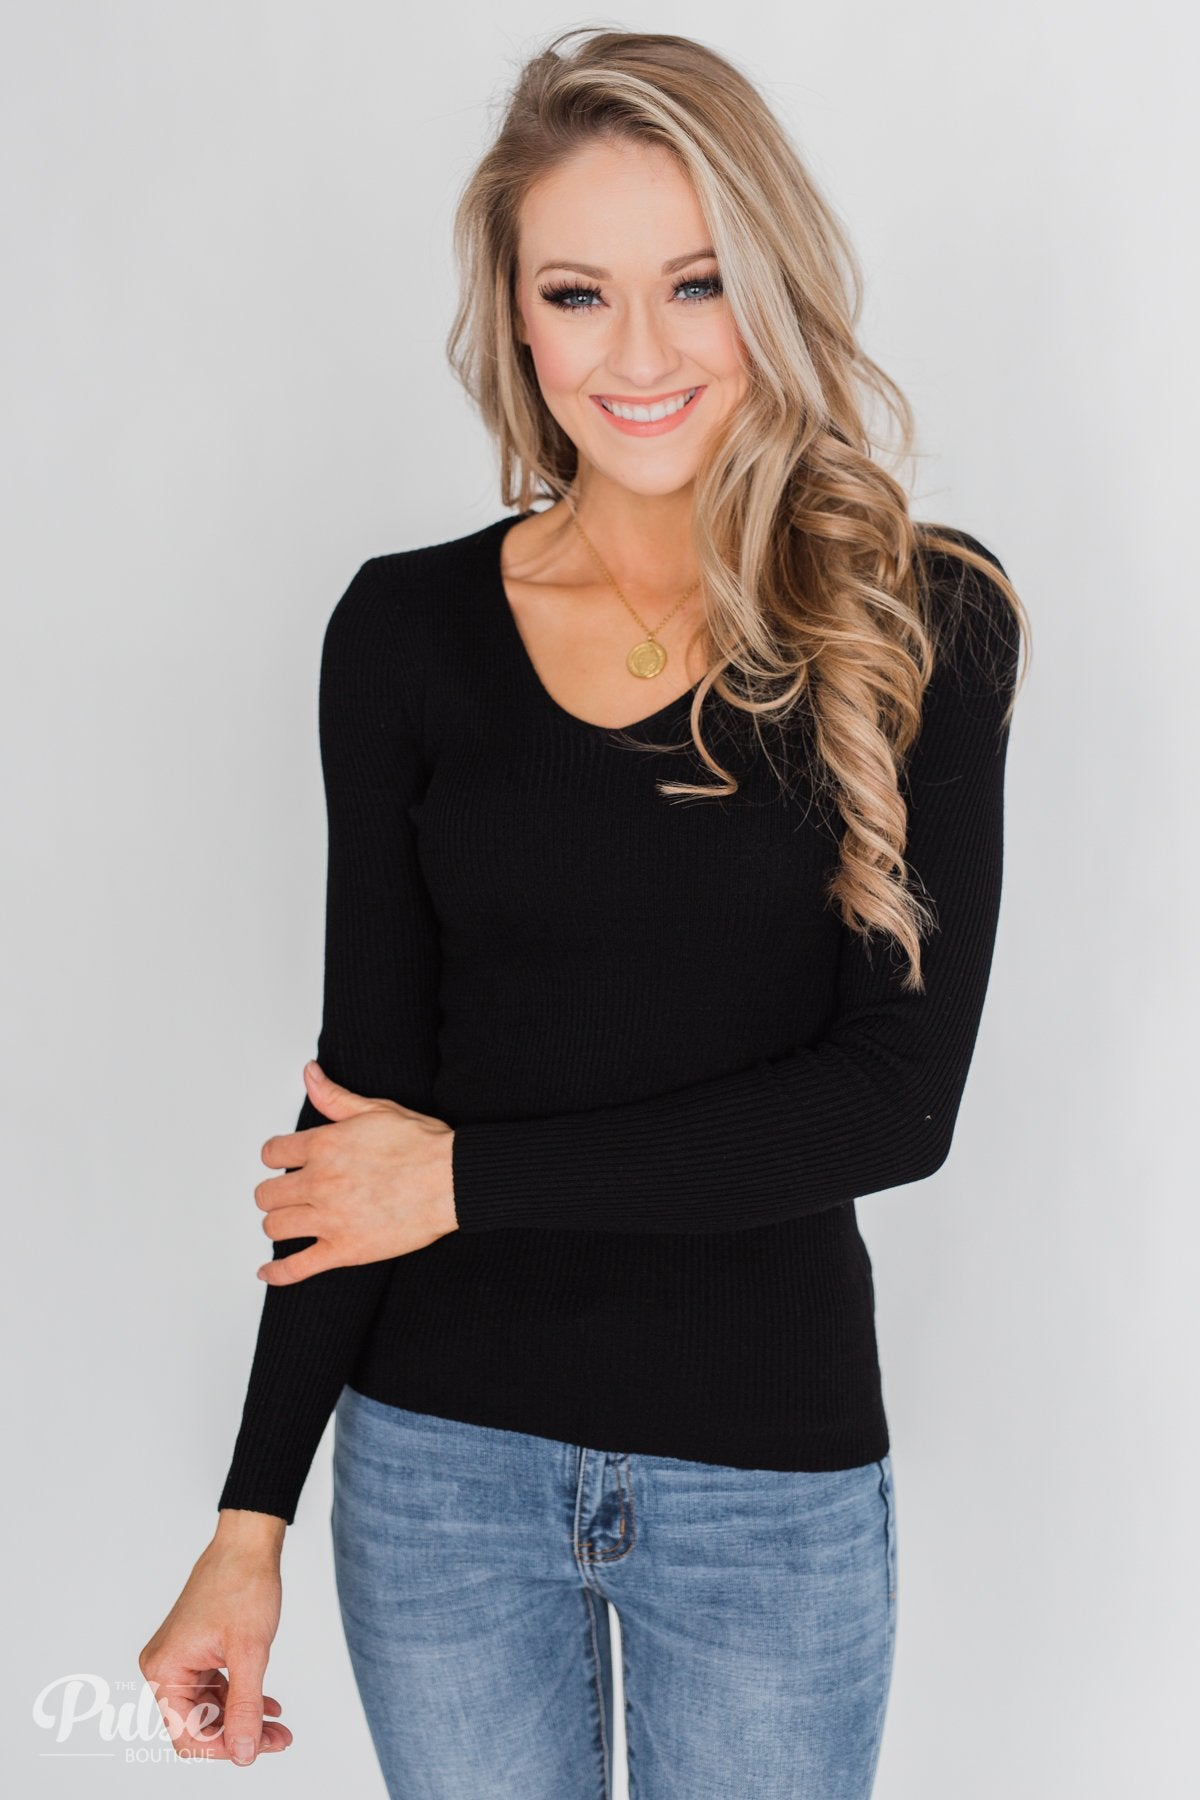 Fitted V-Neck Long Sleeve Top - Black